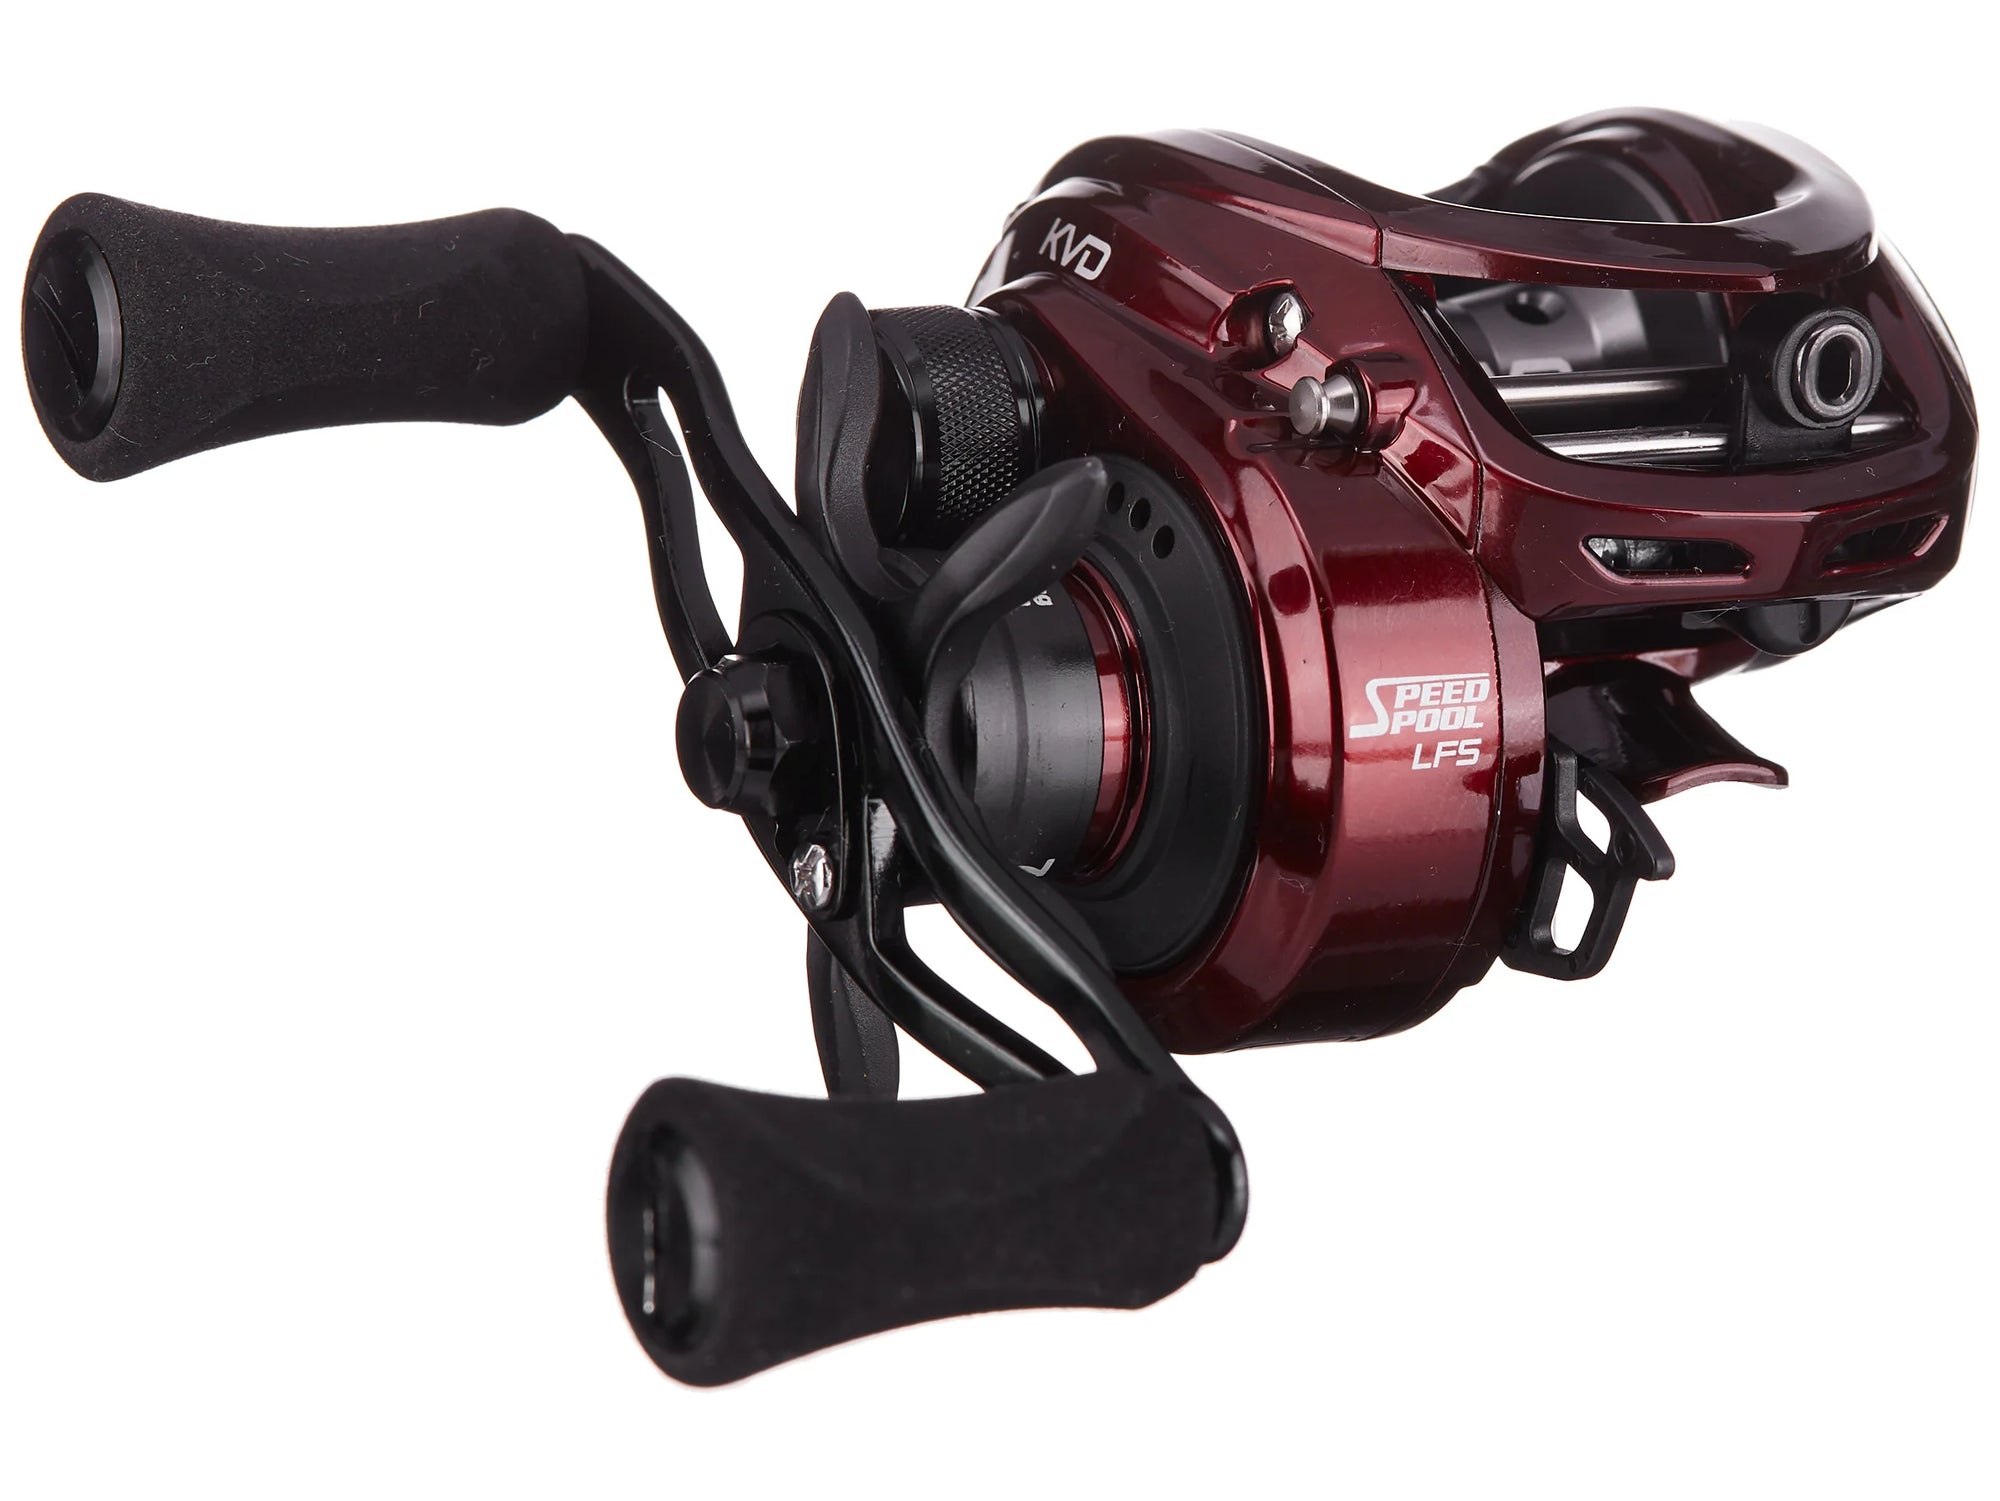 TEAM LEW'S PRO SP SKIPPING & PITCHING BAITCAST REEL – Canadian Tackle Store